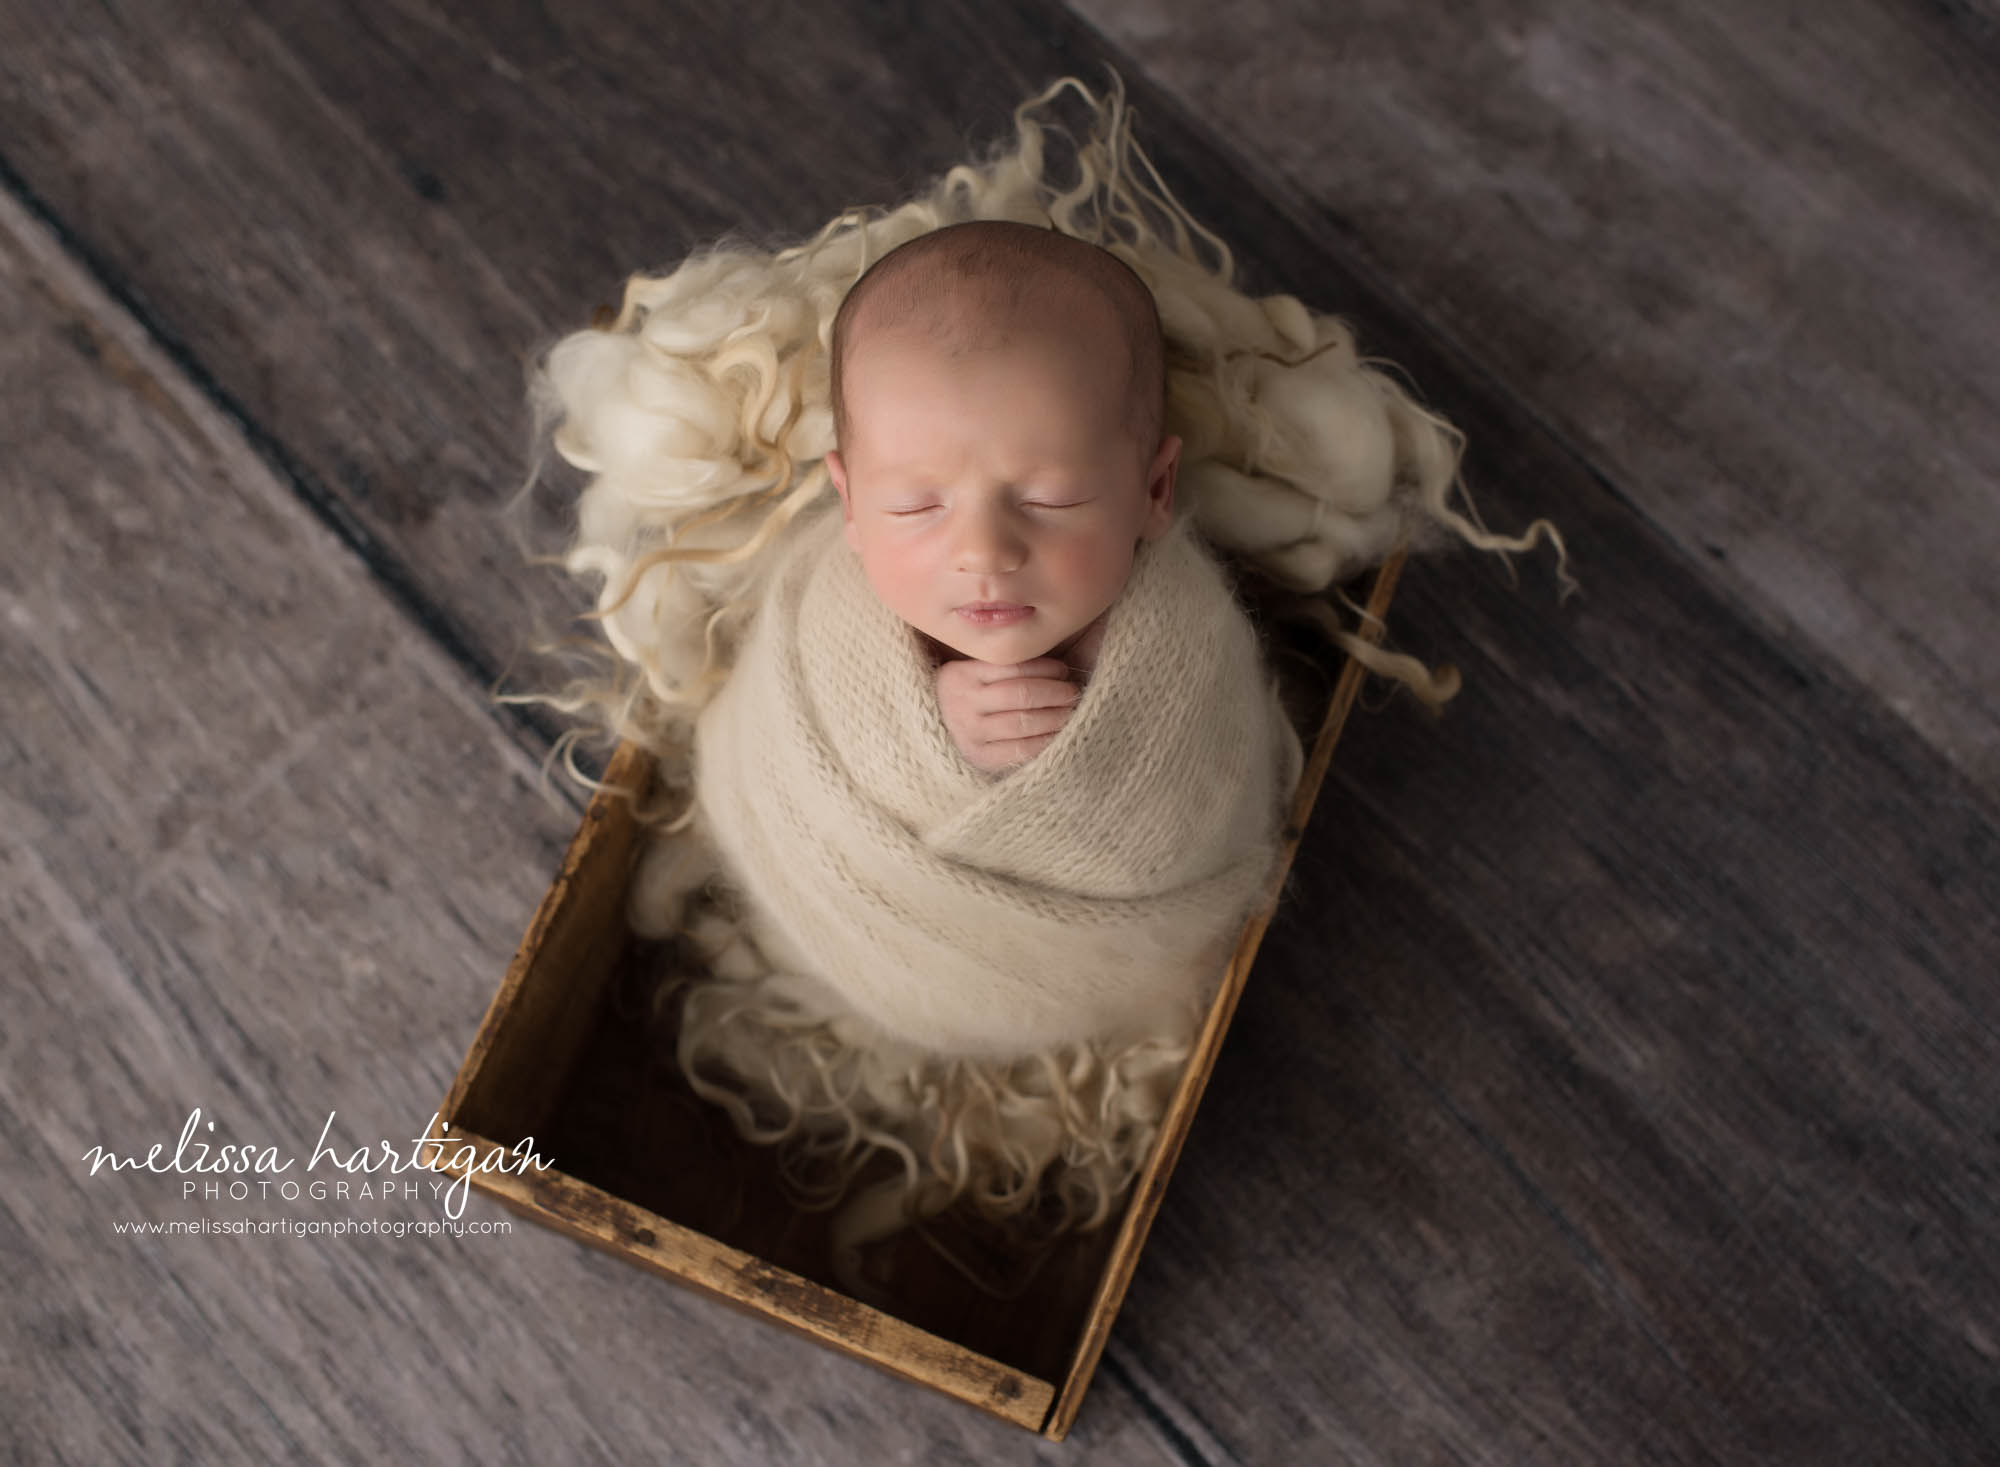 newborn baby boy wrapped in knitted wrap with neutral earth tone colors tolland county newborn photography